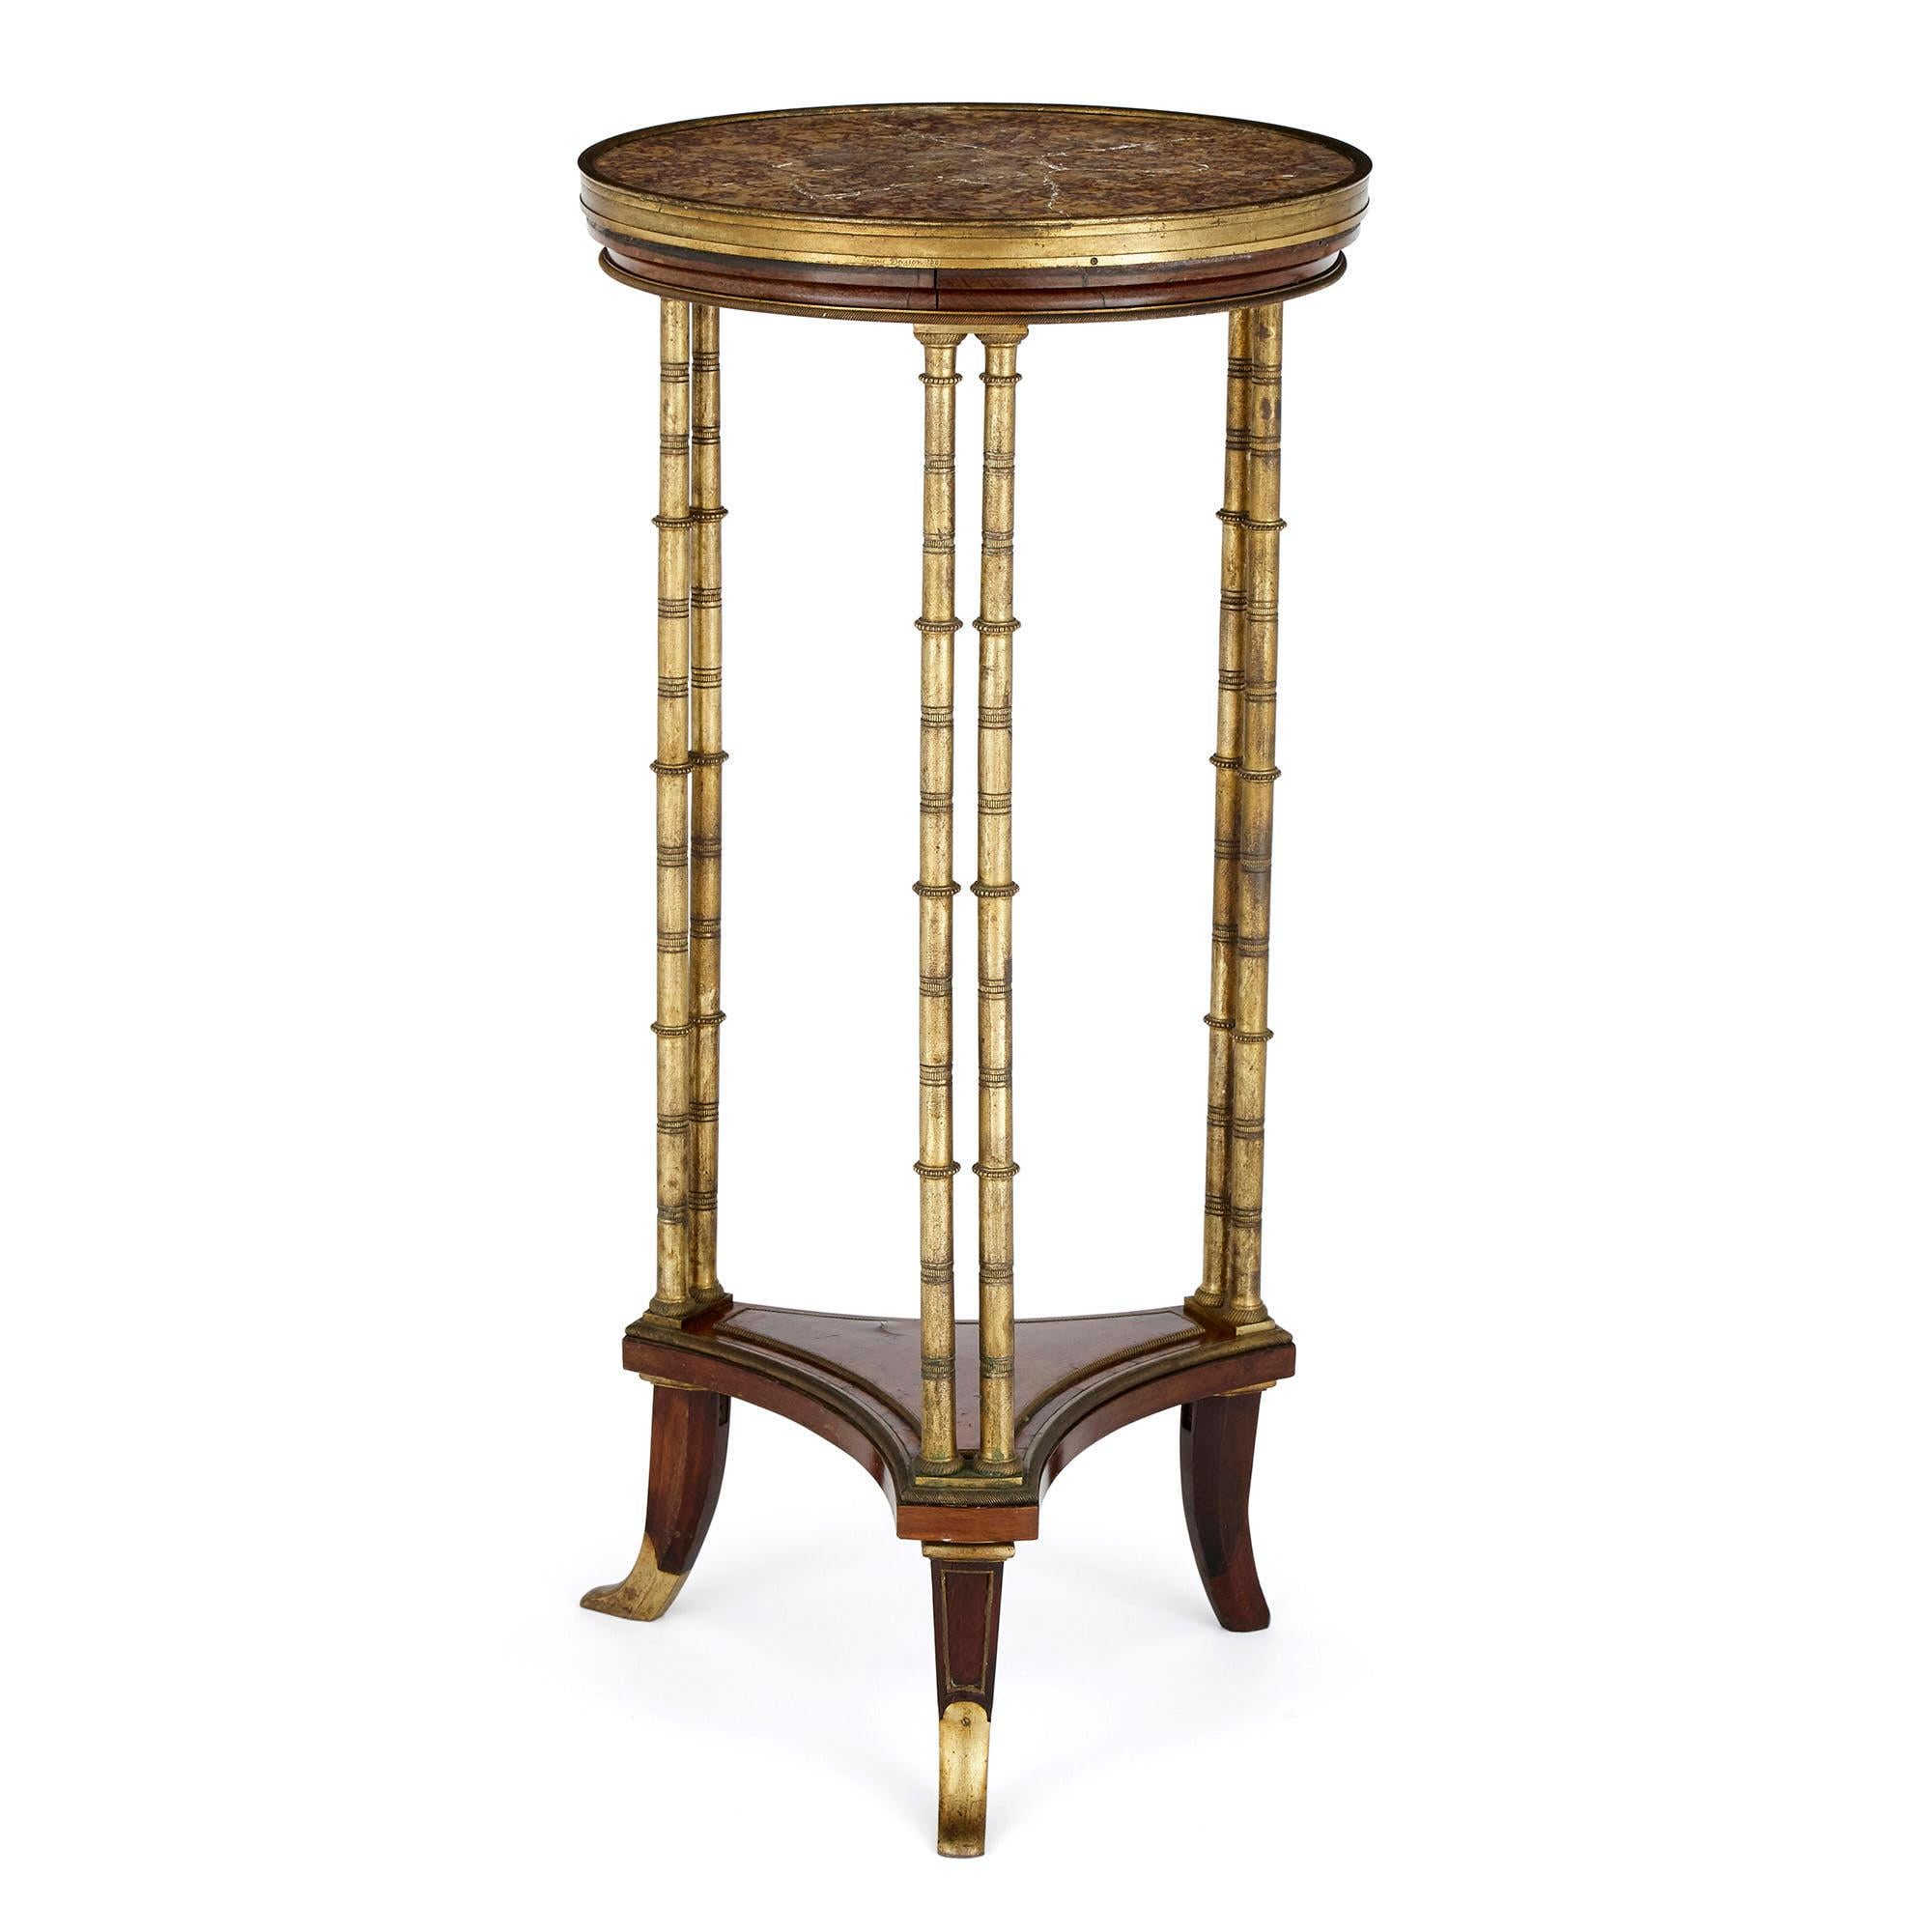 This circular side table by Henry Dasson is surmounted by an inset marble top, which is bounded by a gilt bronze ring and is set above a mahogany apron. The table stands on three two-column gilt bronze legs, which in turn meet the ground on gilt